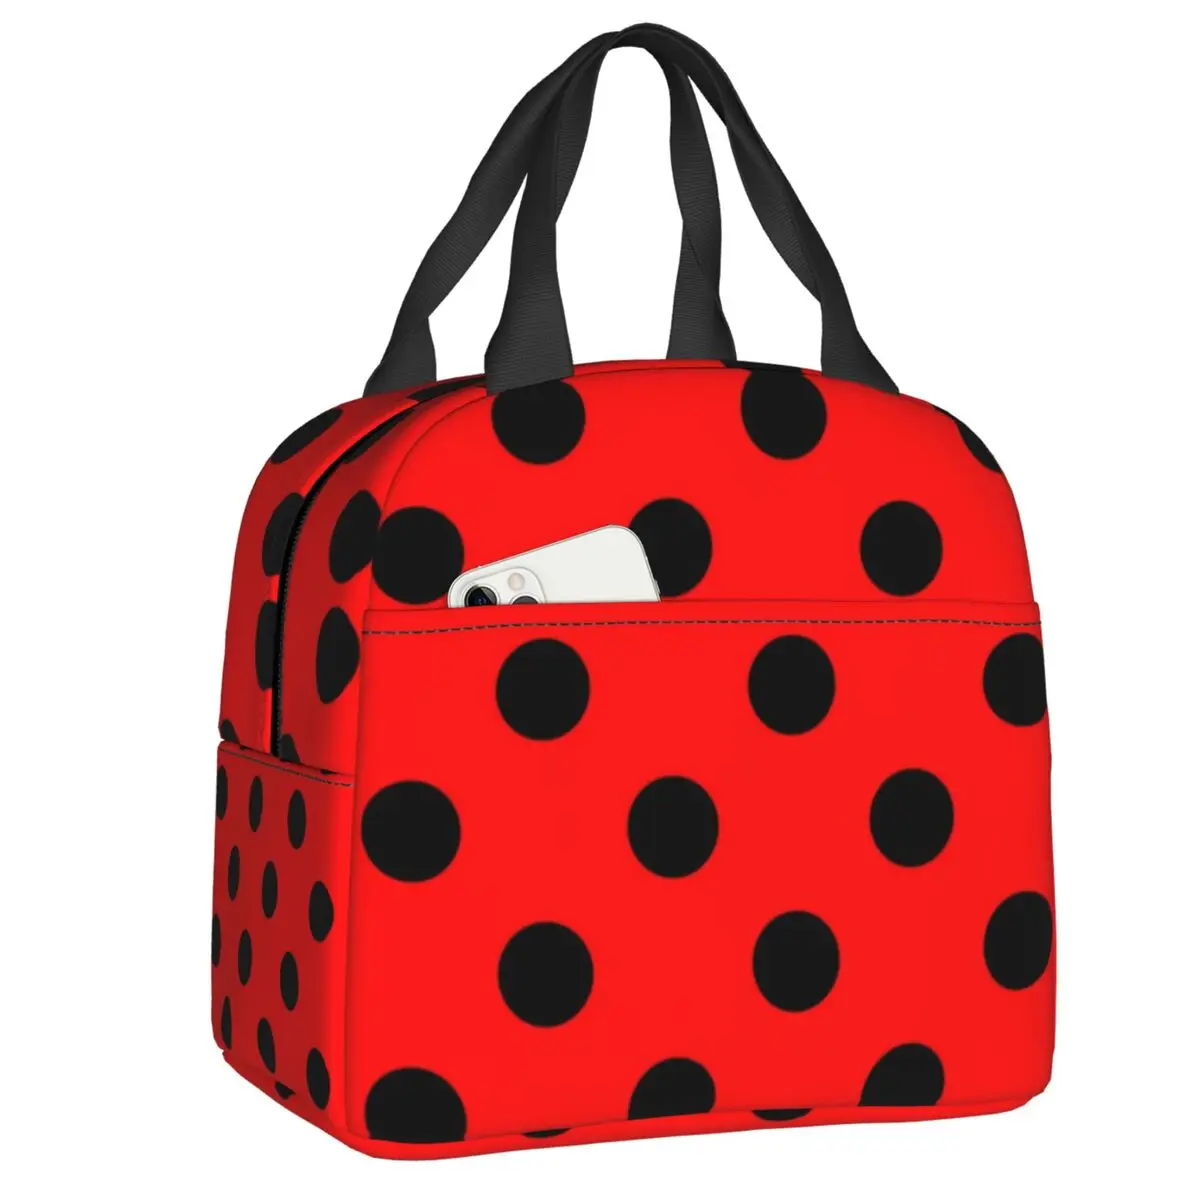 Red And Black Polka Dots Thermal Insulated Lunch Bag Ladybugs Pattern Portable Lunch Tote for Kids School Multifunction Food Box